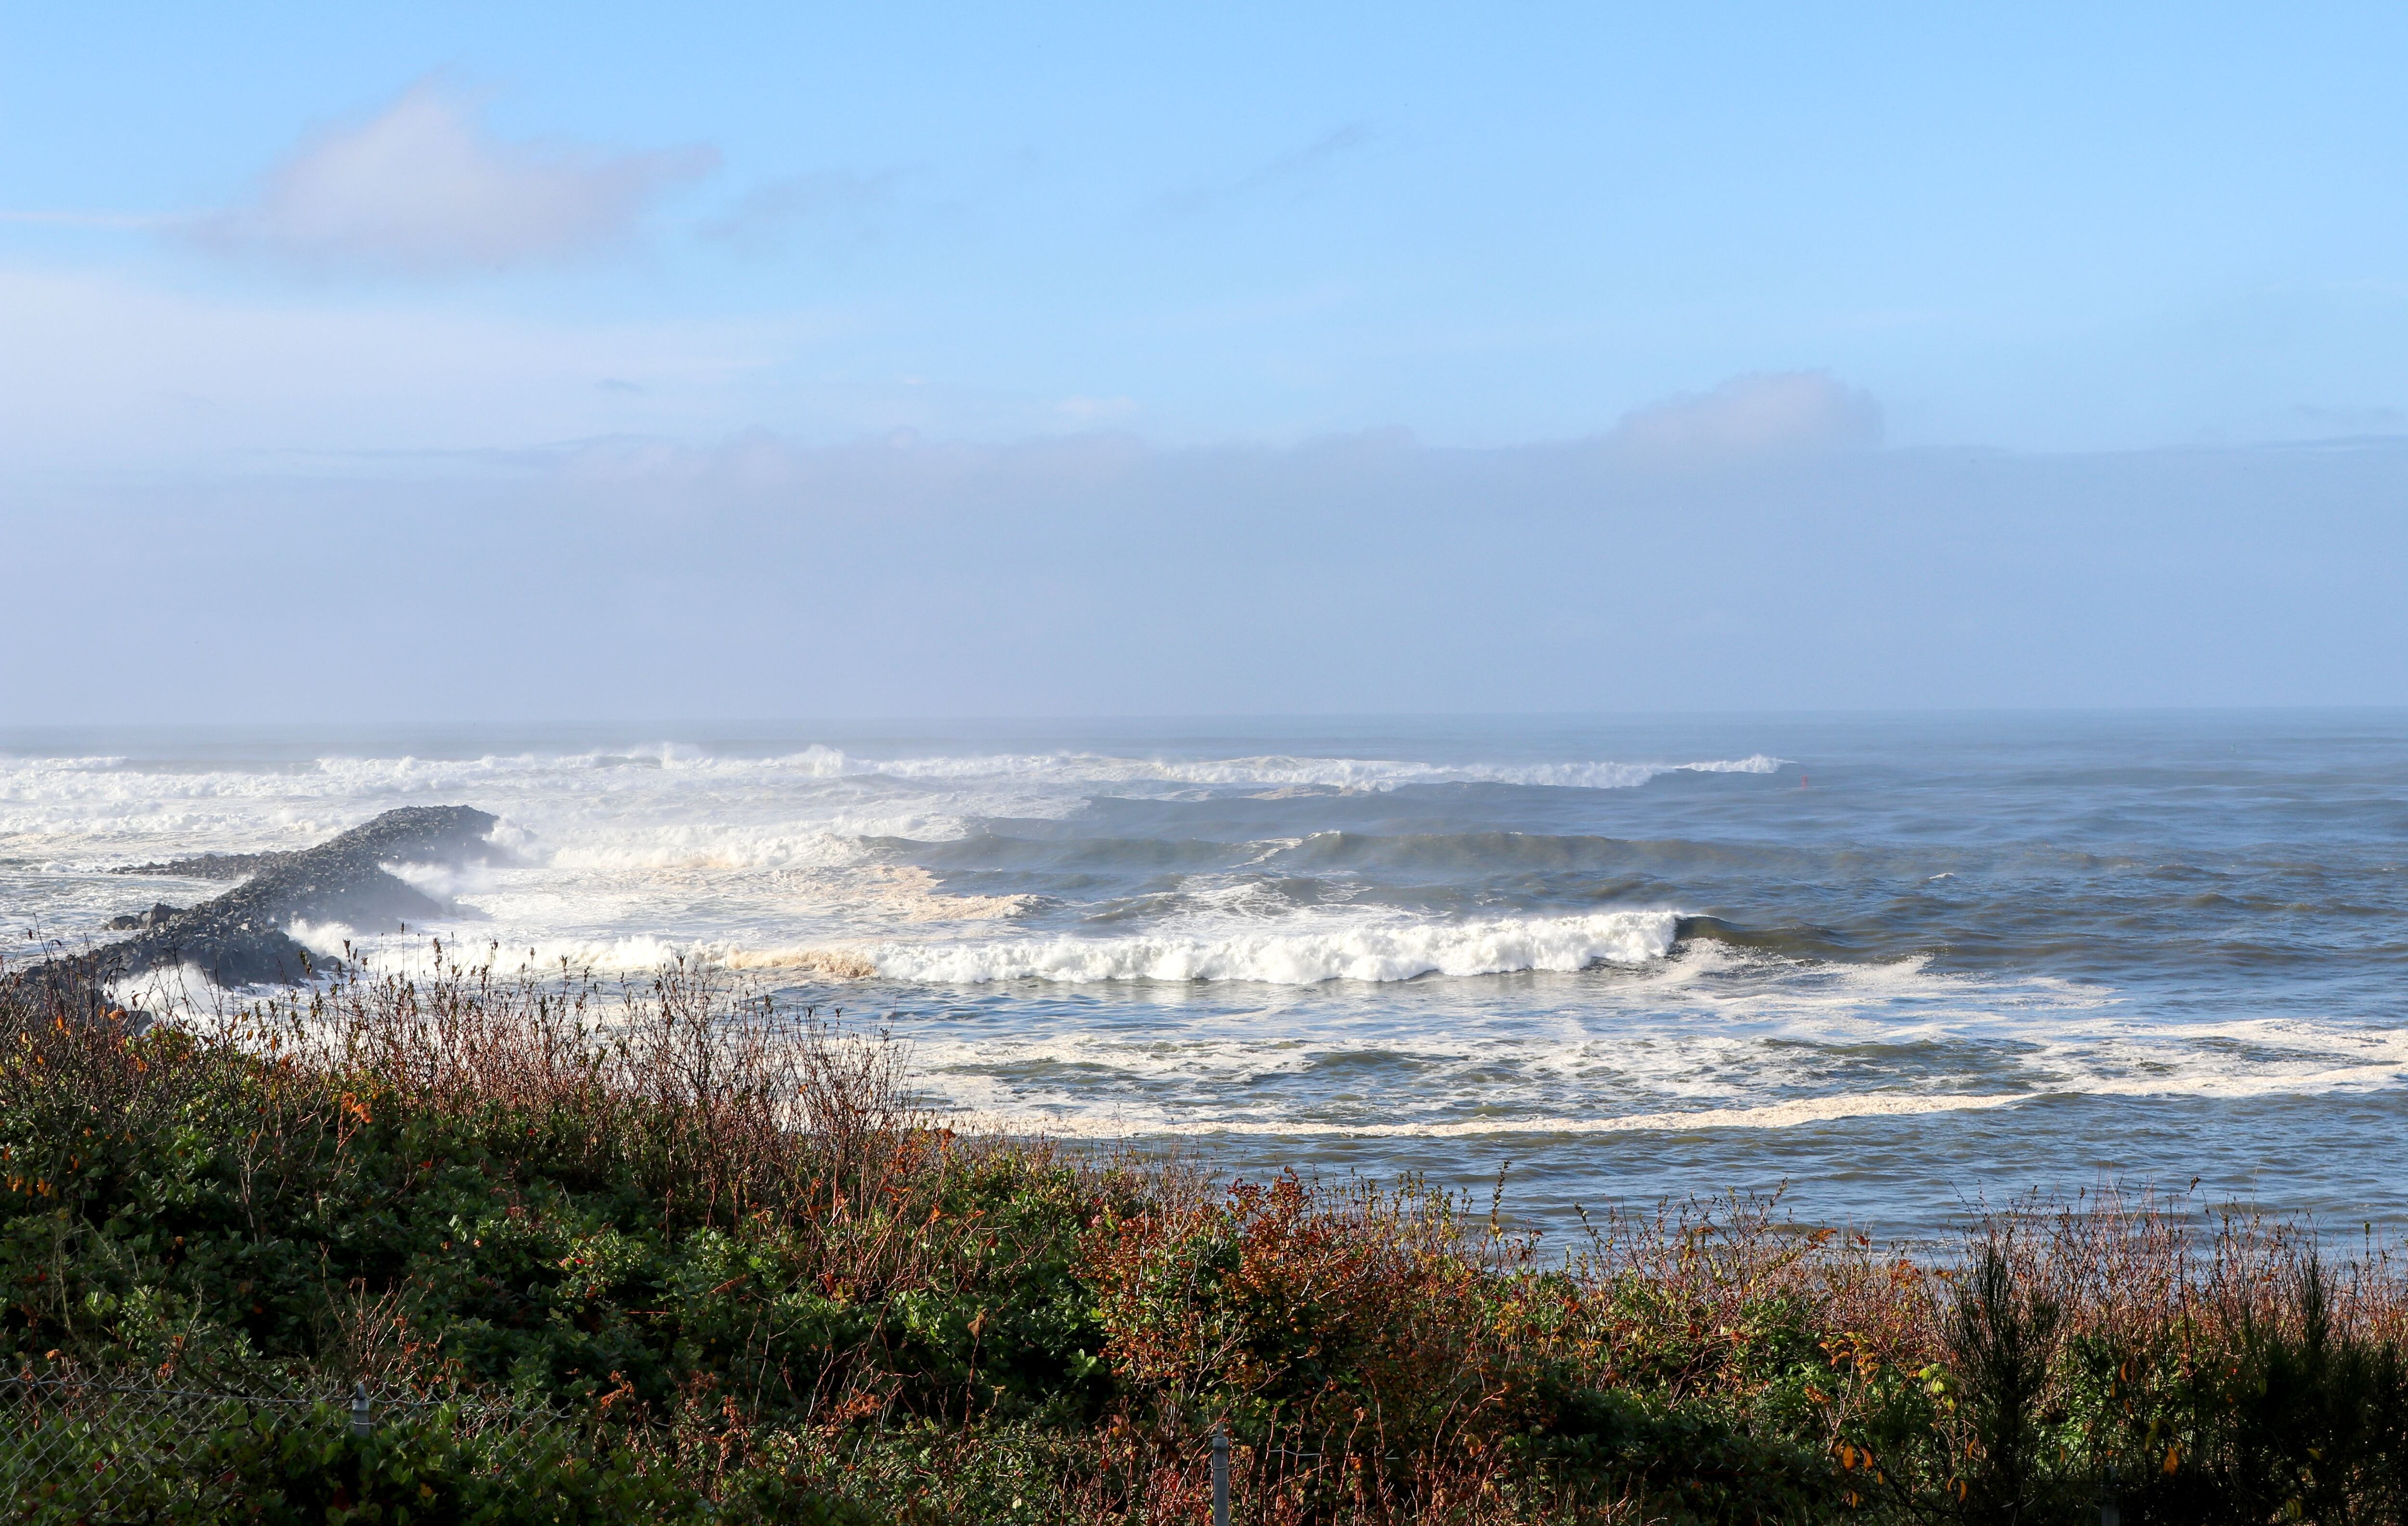 Pacific fishery council calls for new start to Oregon wind planning